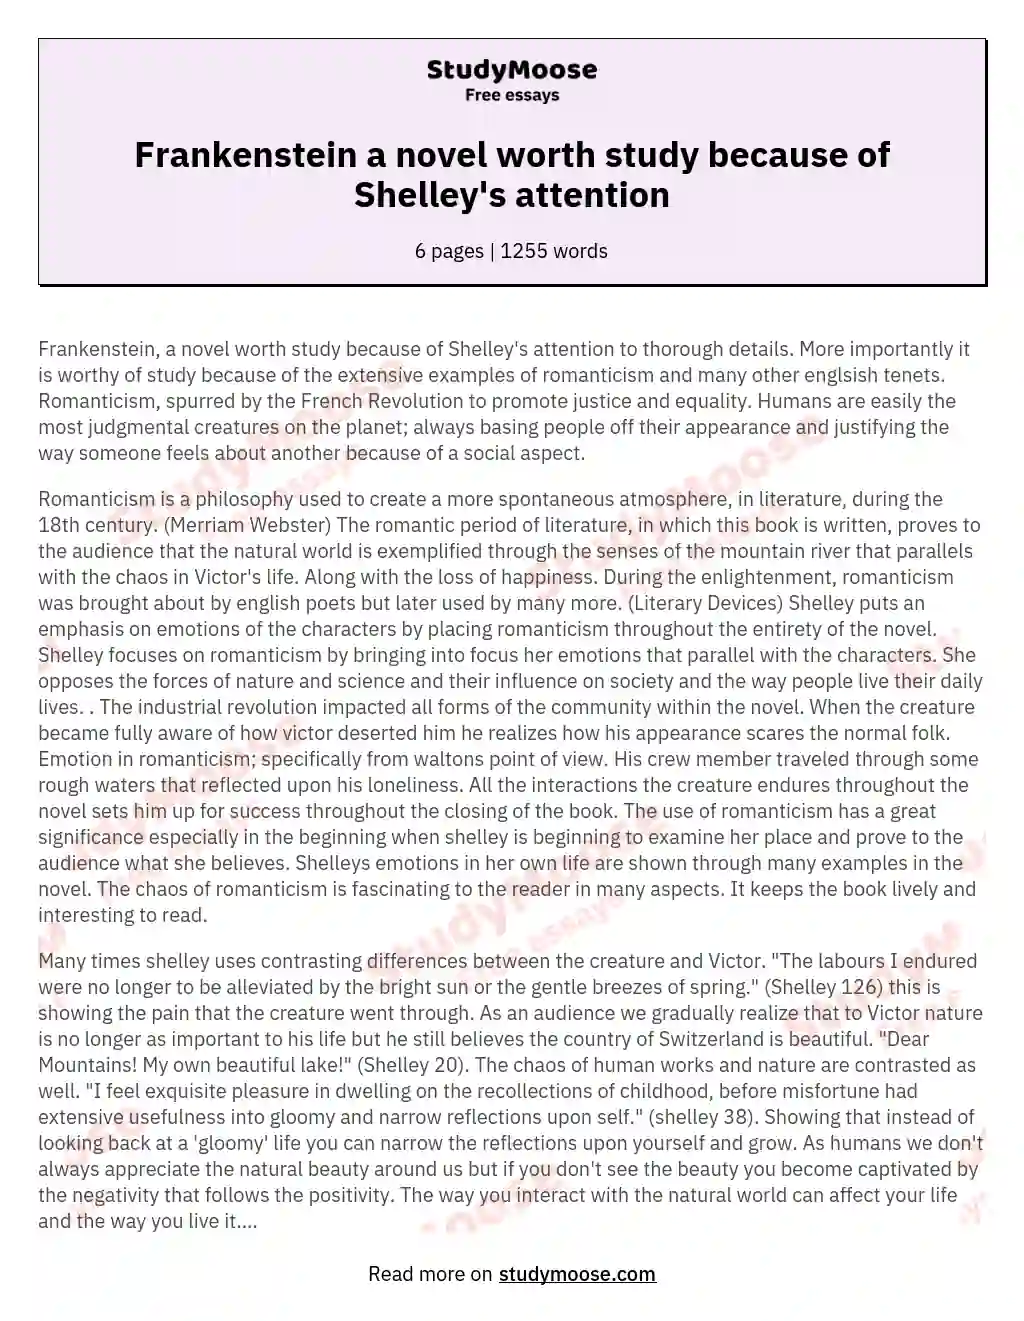 Frankenstein a novel worth study because of Shelley's attention